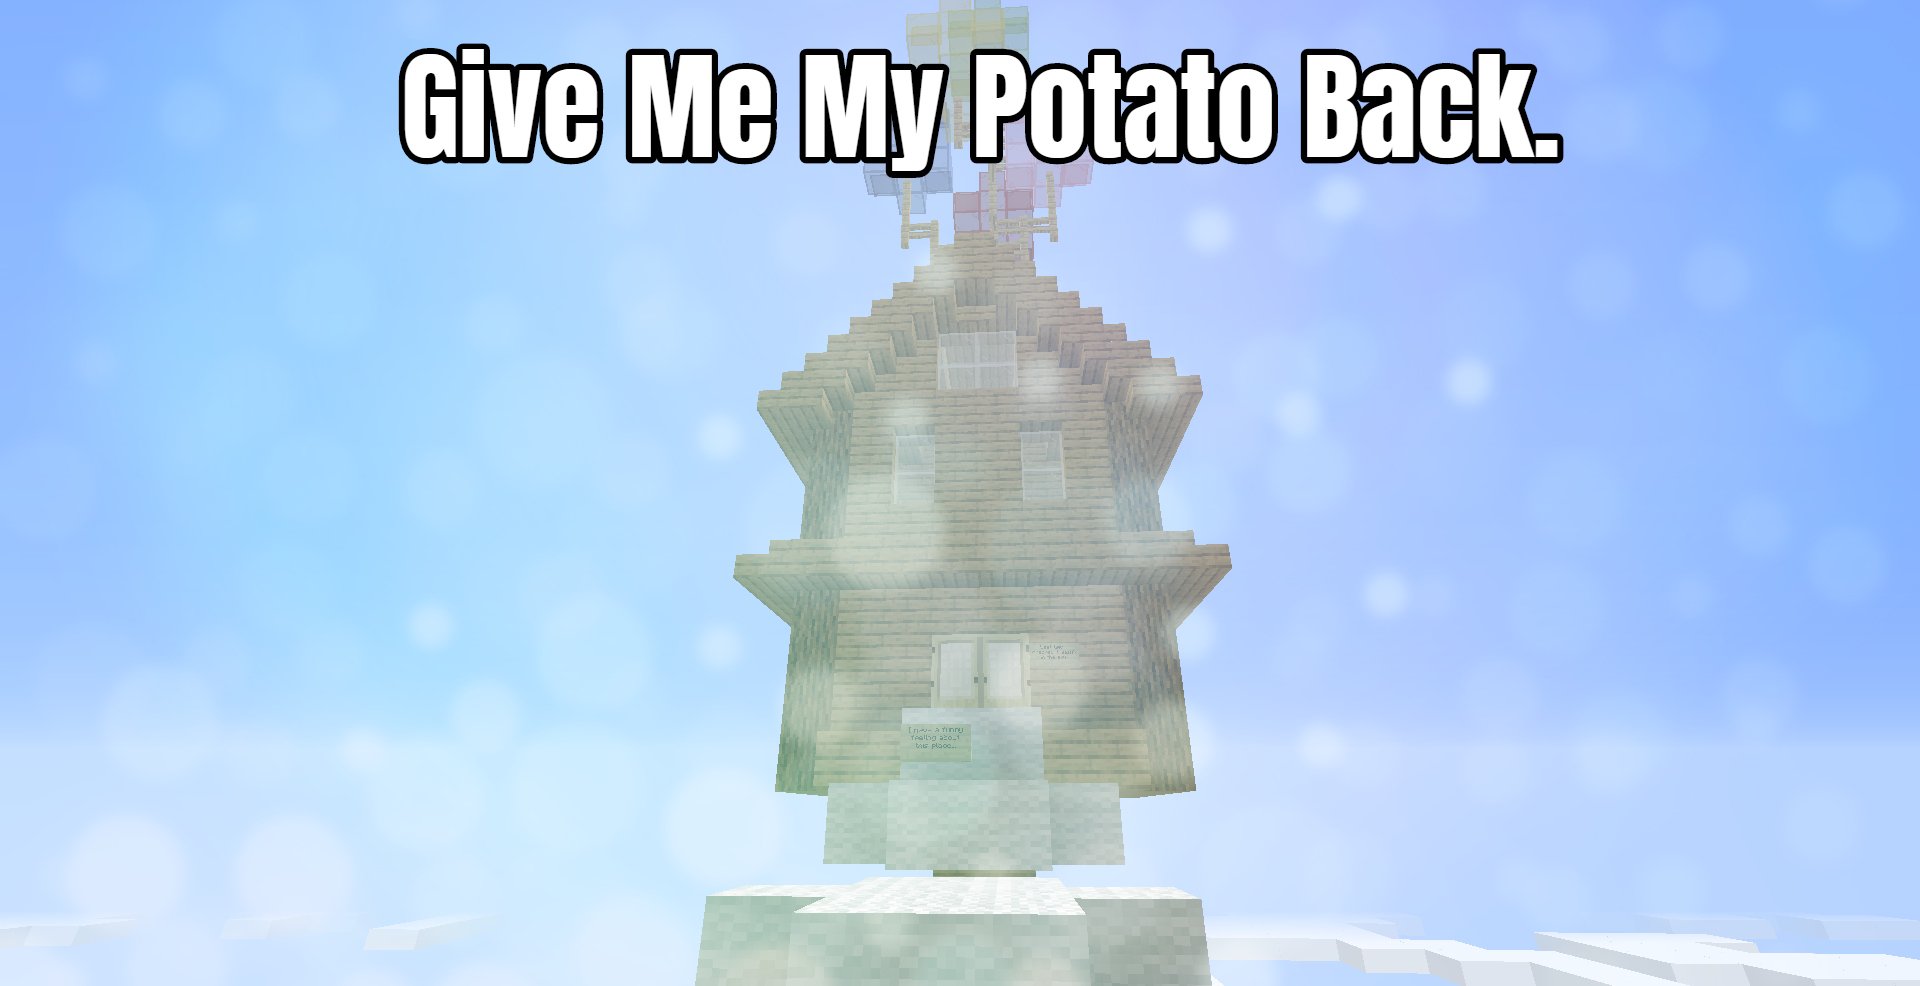 Download Give Me My Potato Back. for Minecraft 1.14.4